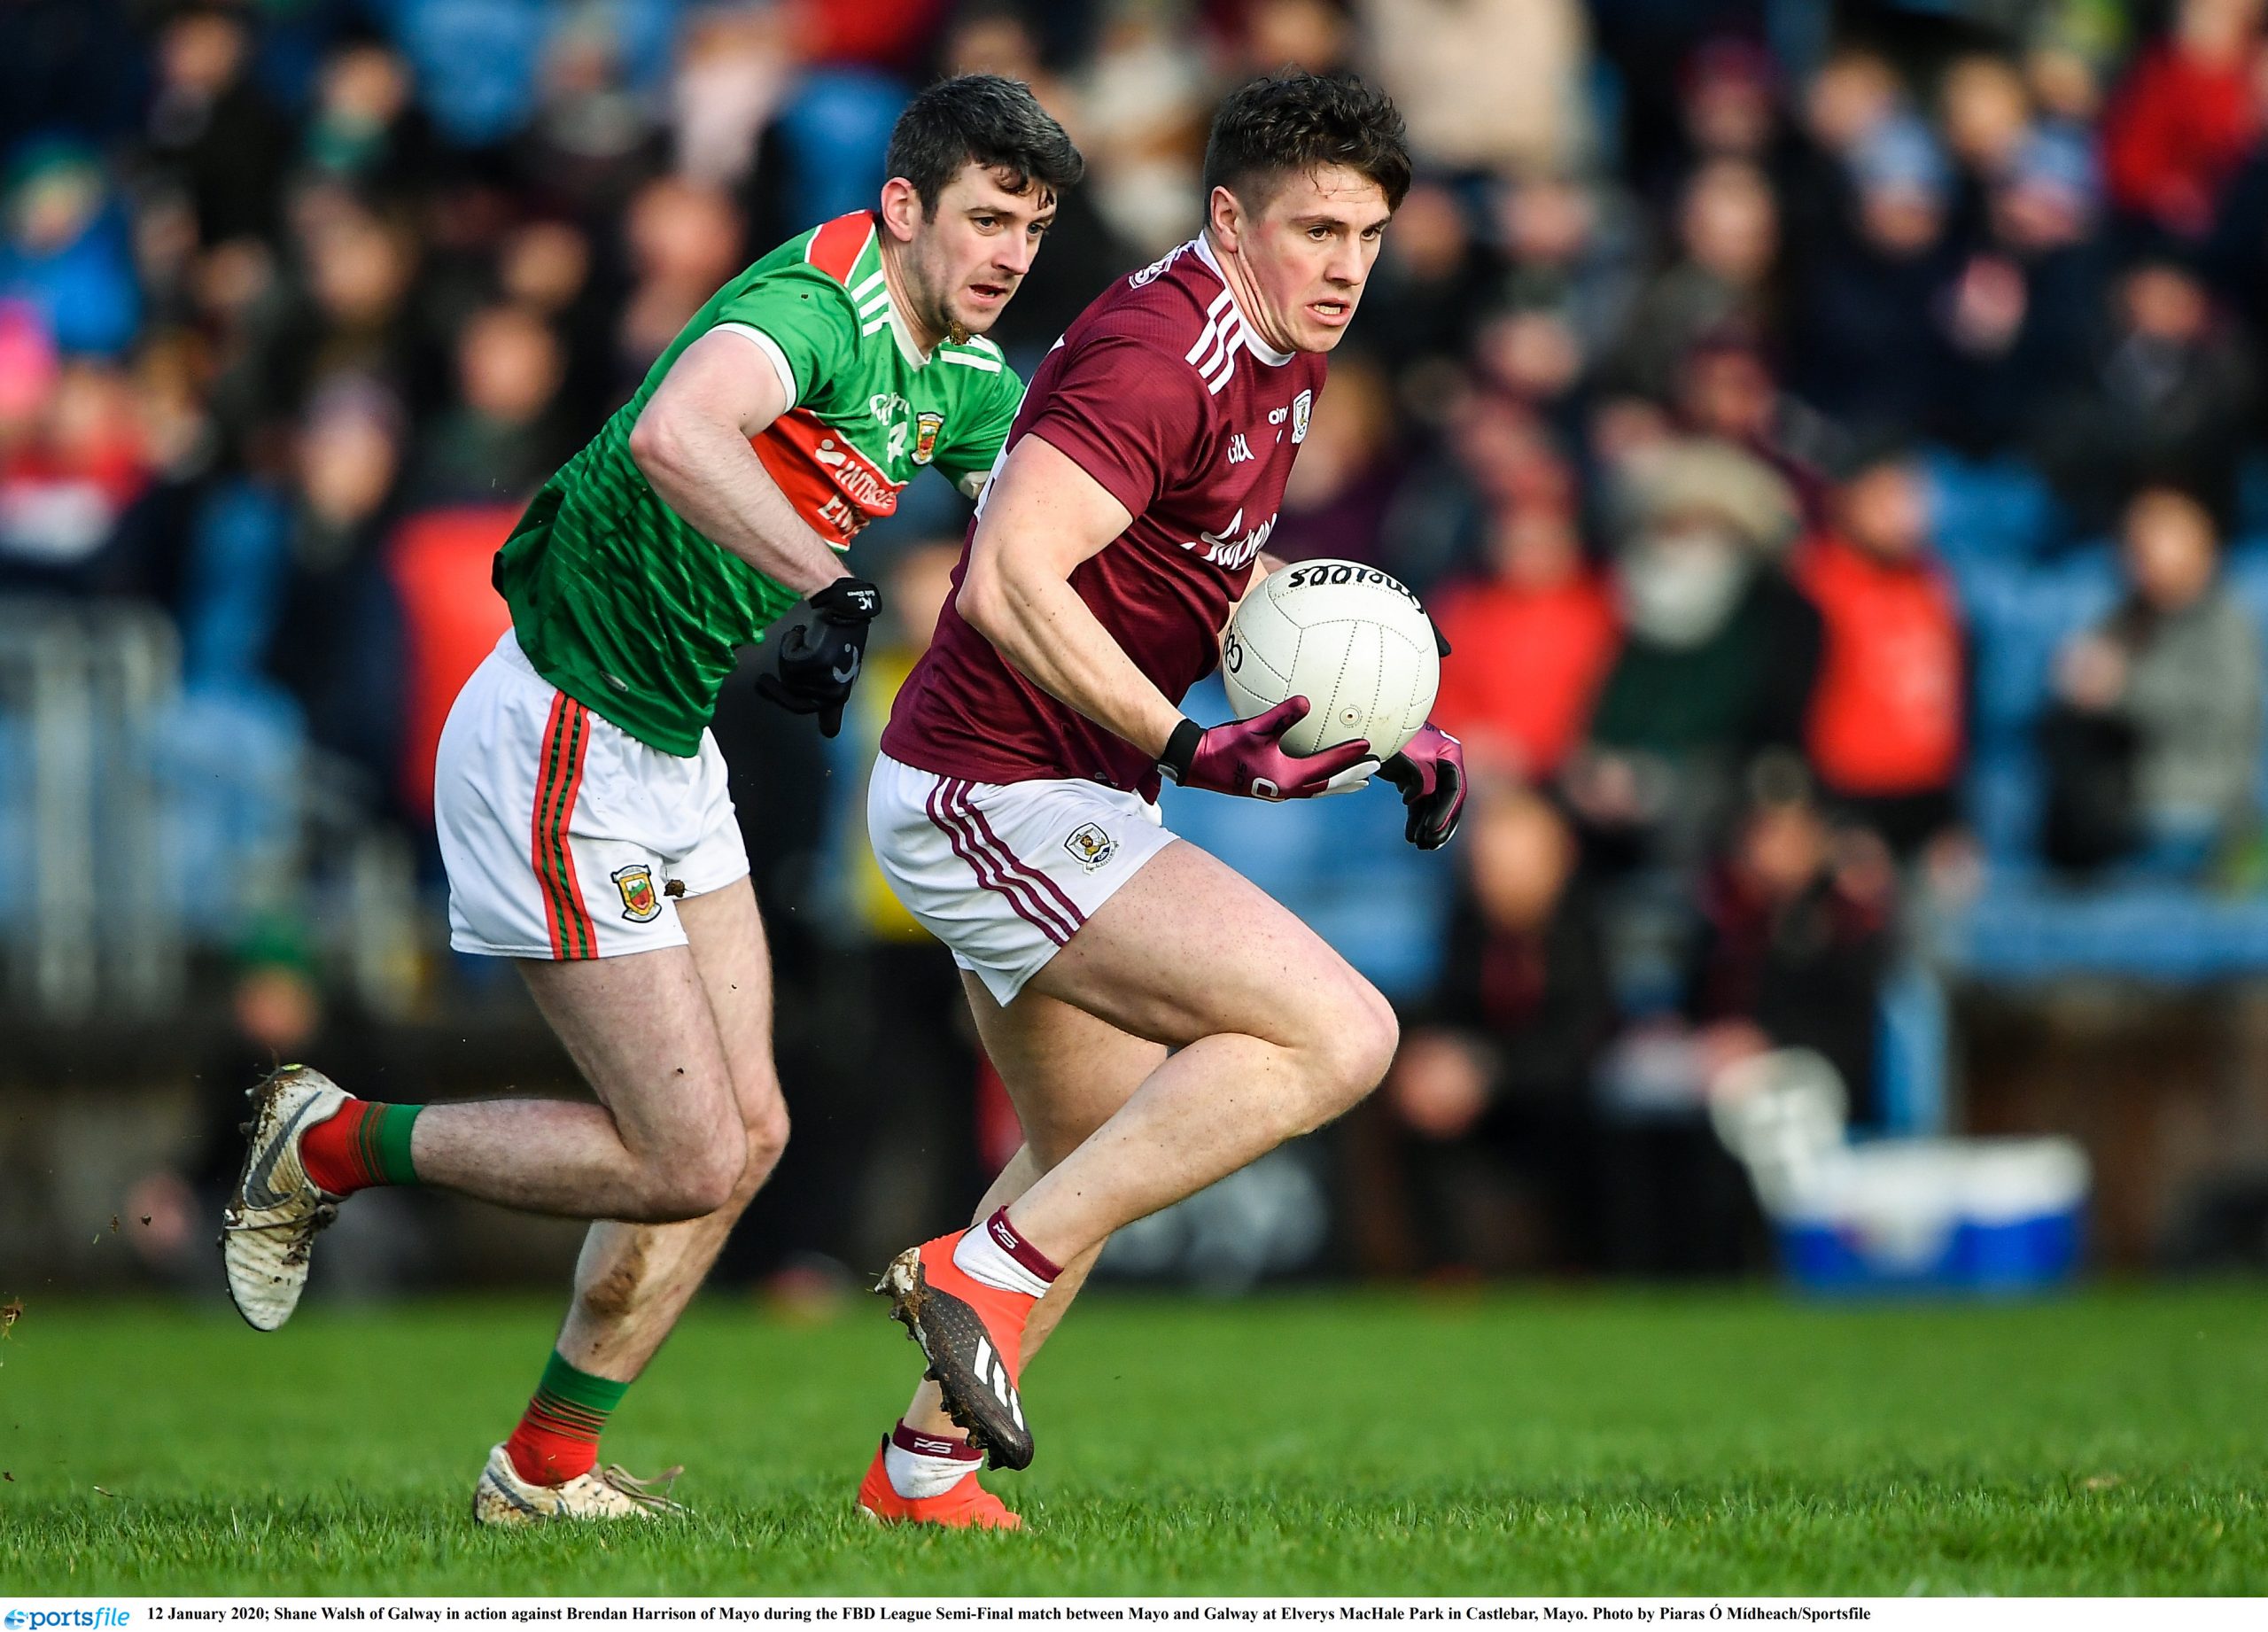 Penalty Drama in Castlebar as Galway Edge out Mayo in FBD Thriller